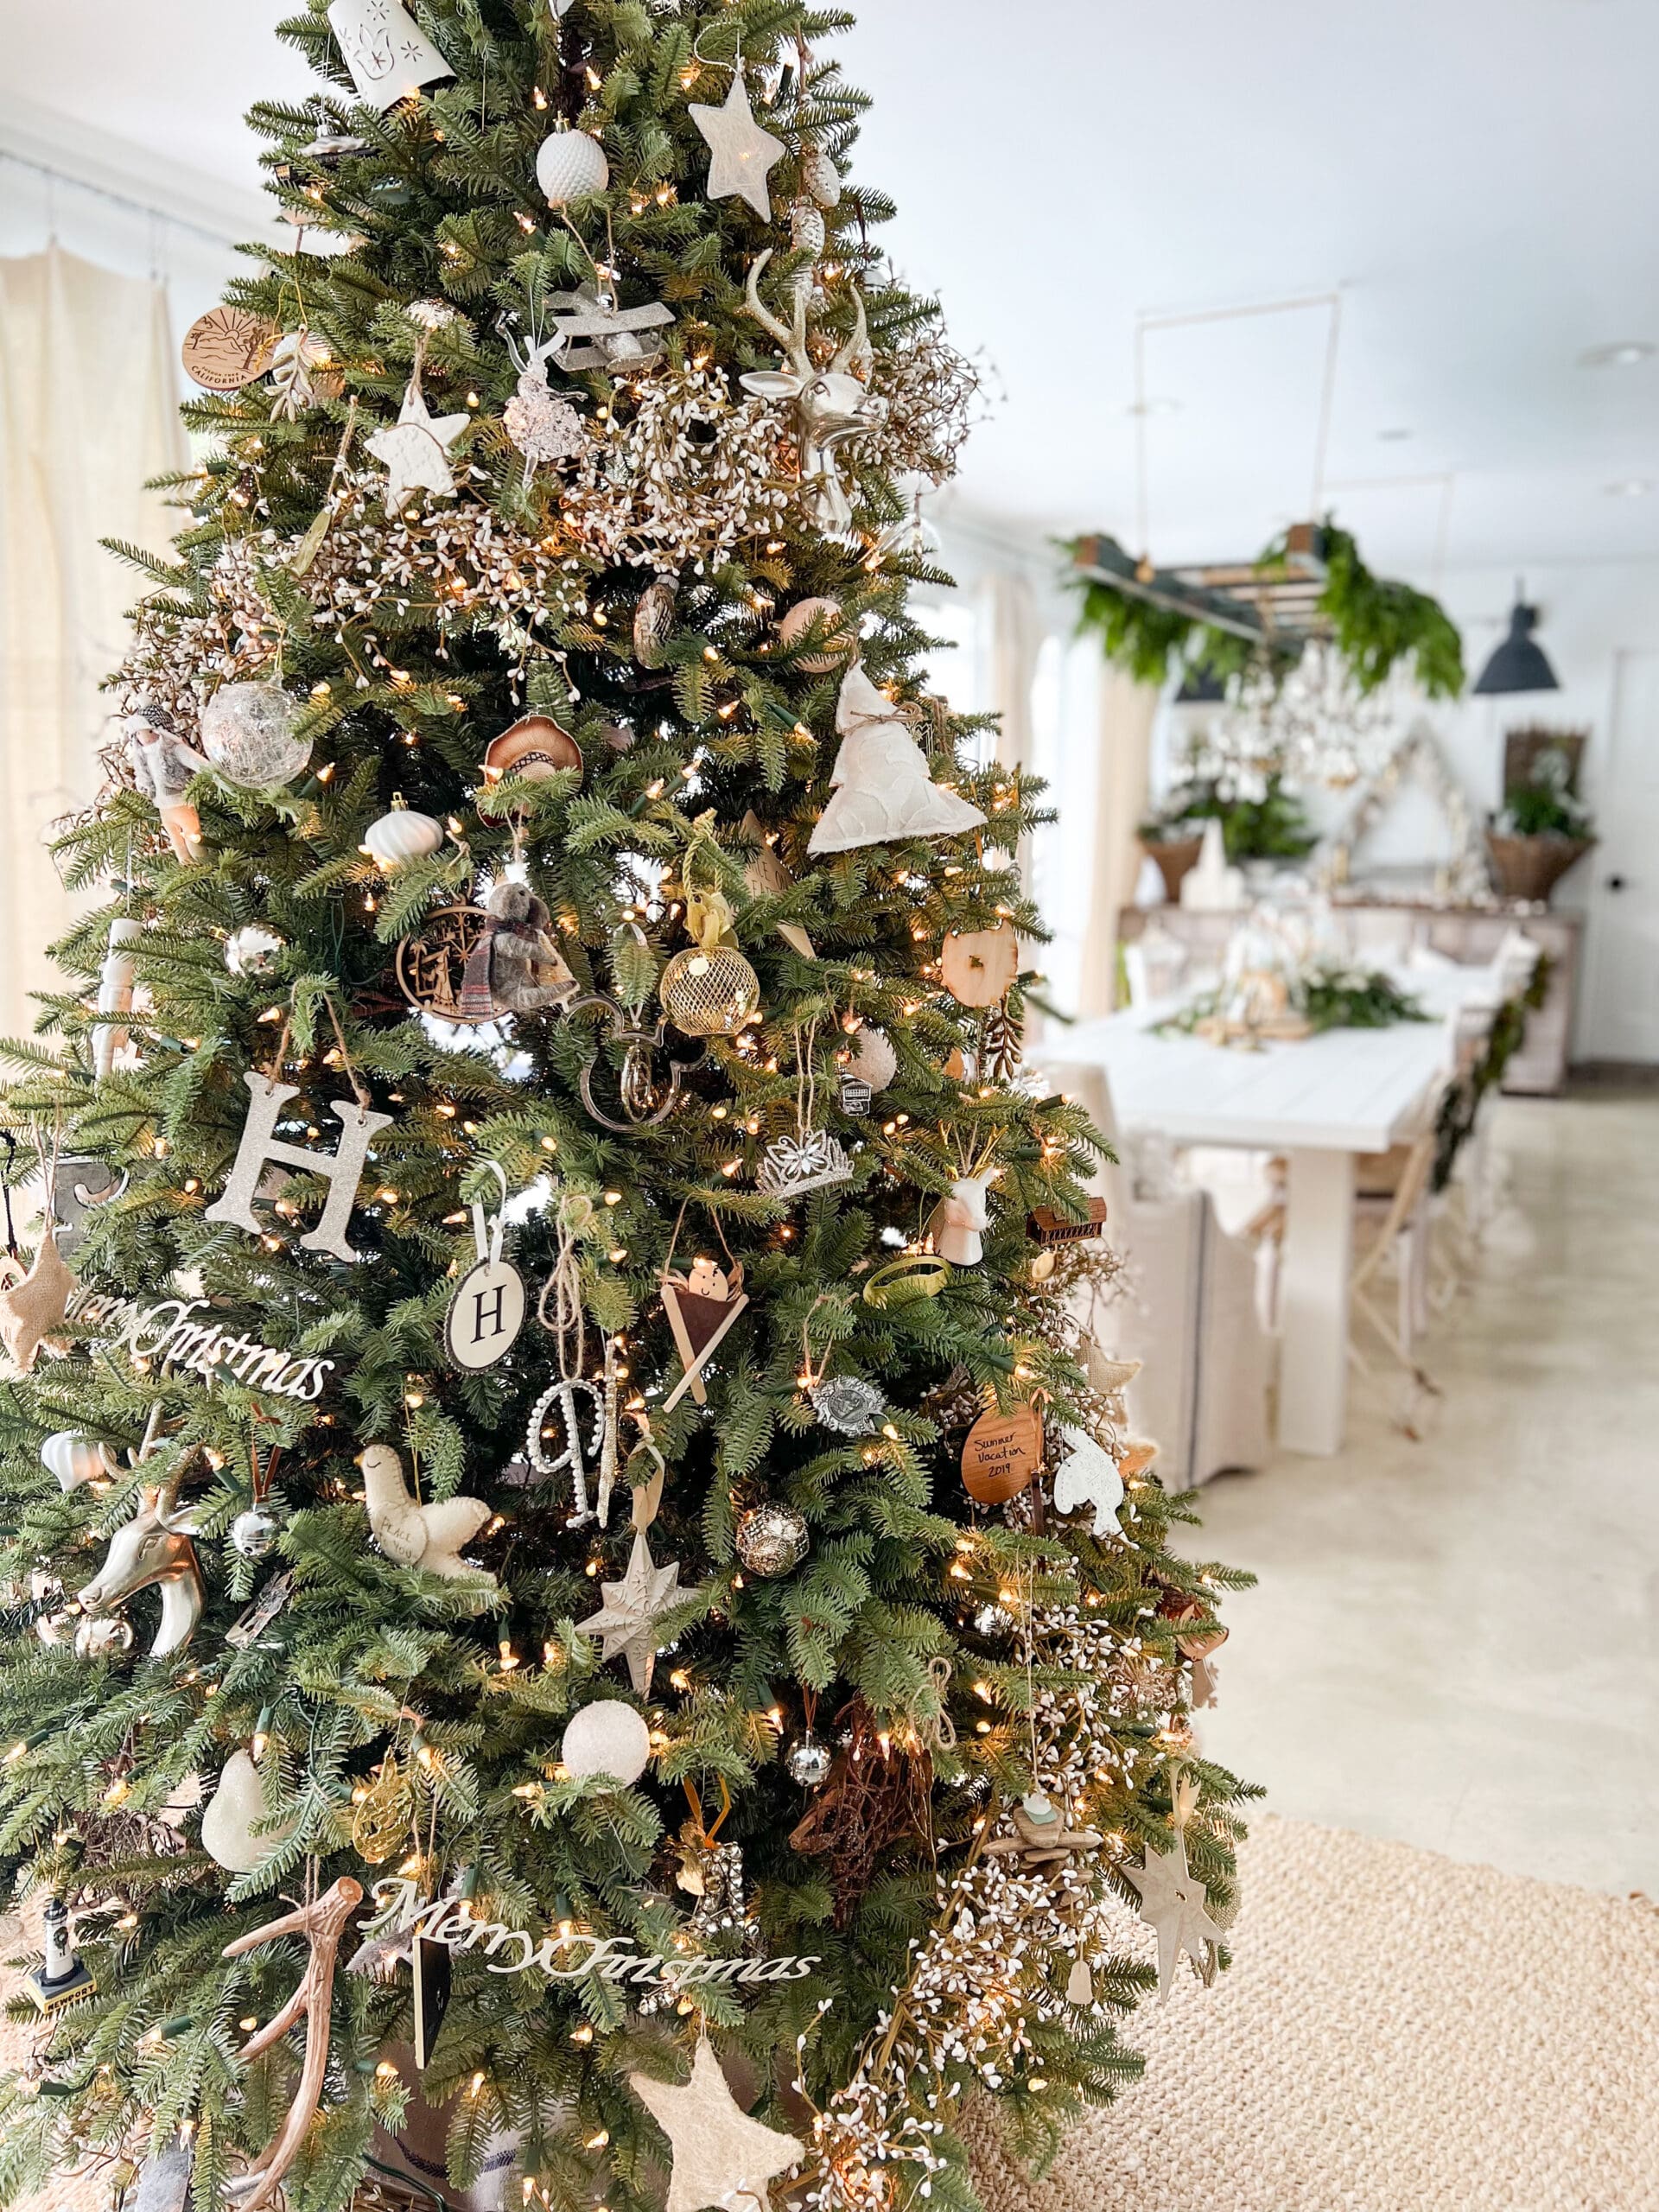 large Christmas tree with various ornaments